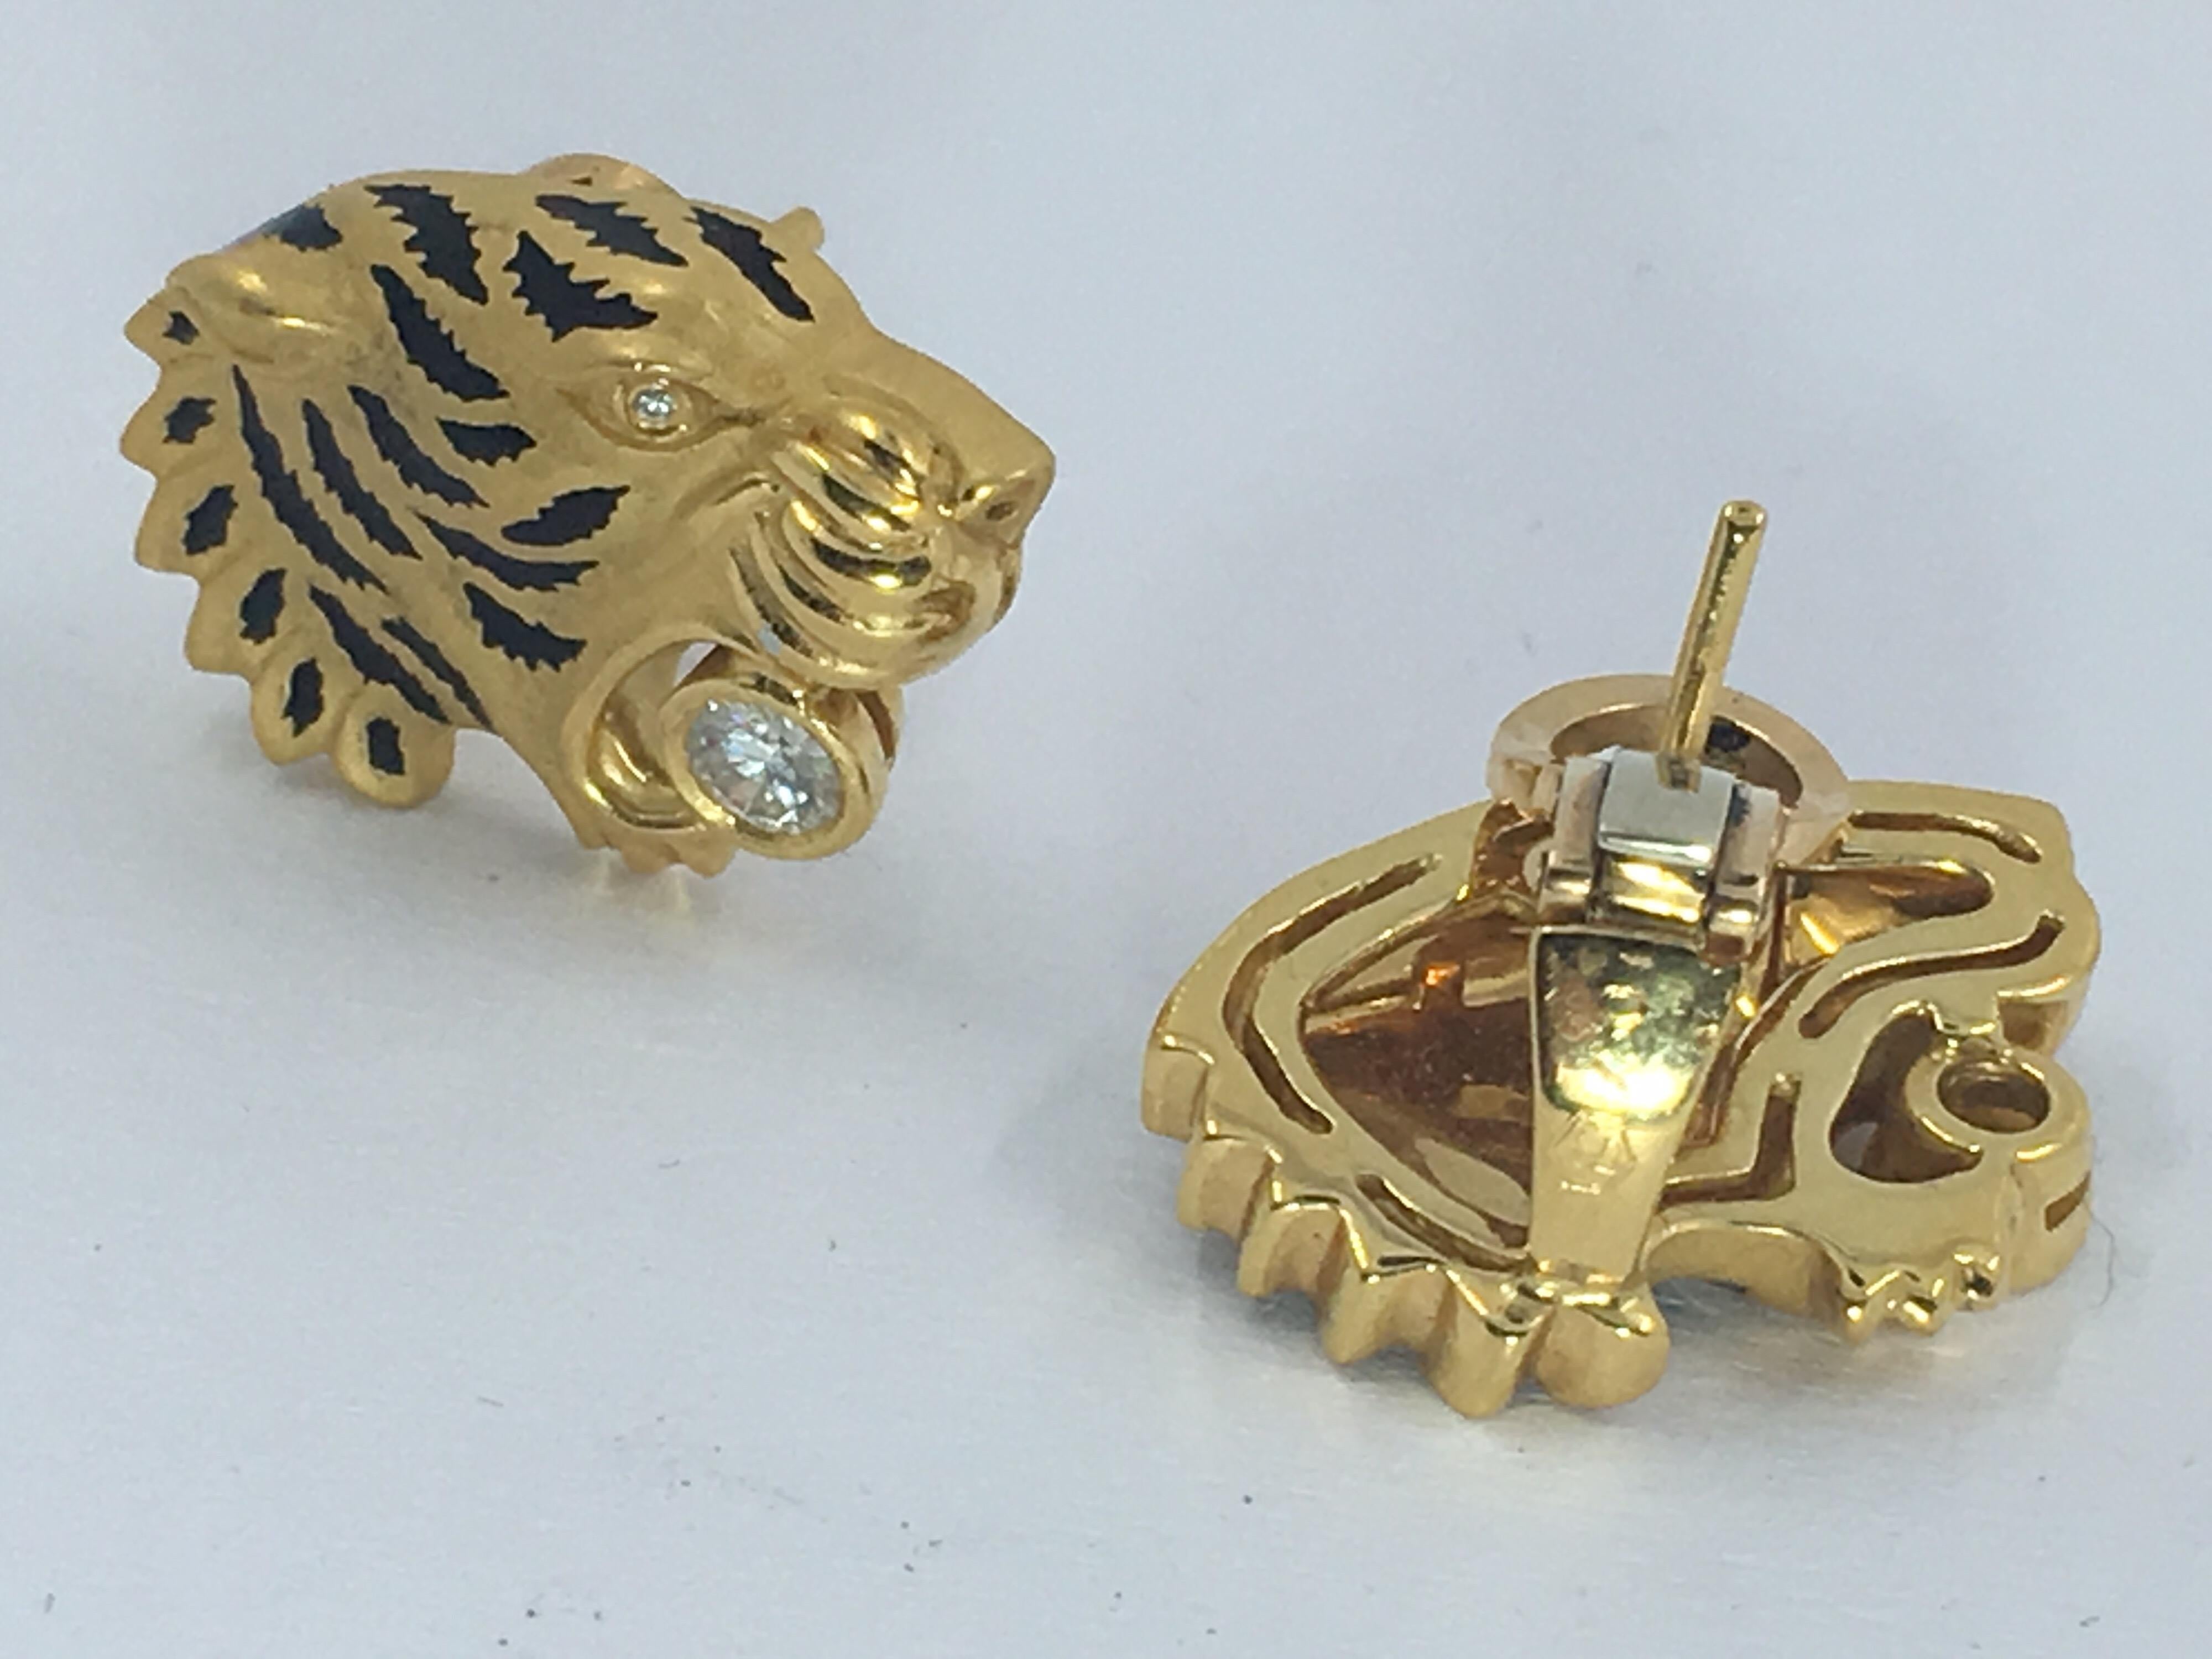 18 Kt Gold Leopard Earrings with diamonds in the eyes and the mouth.